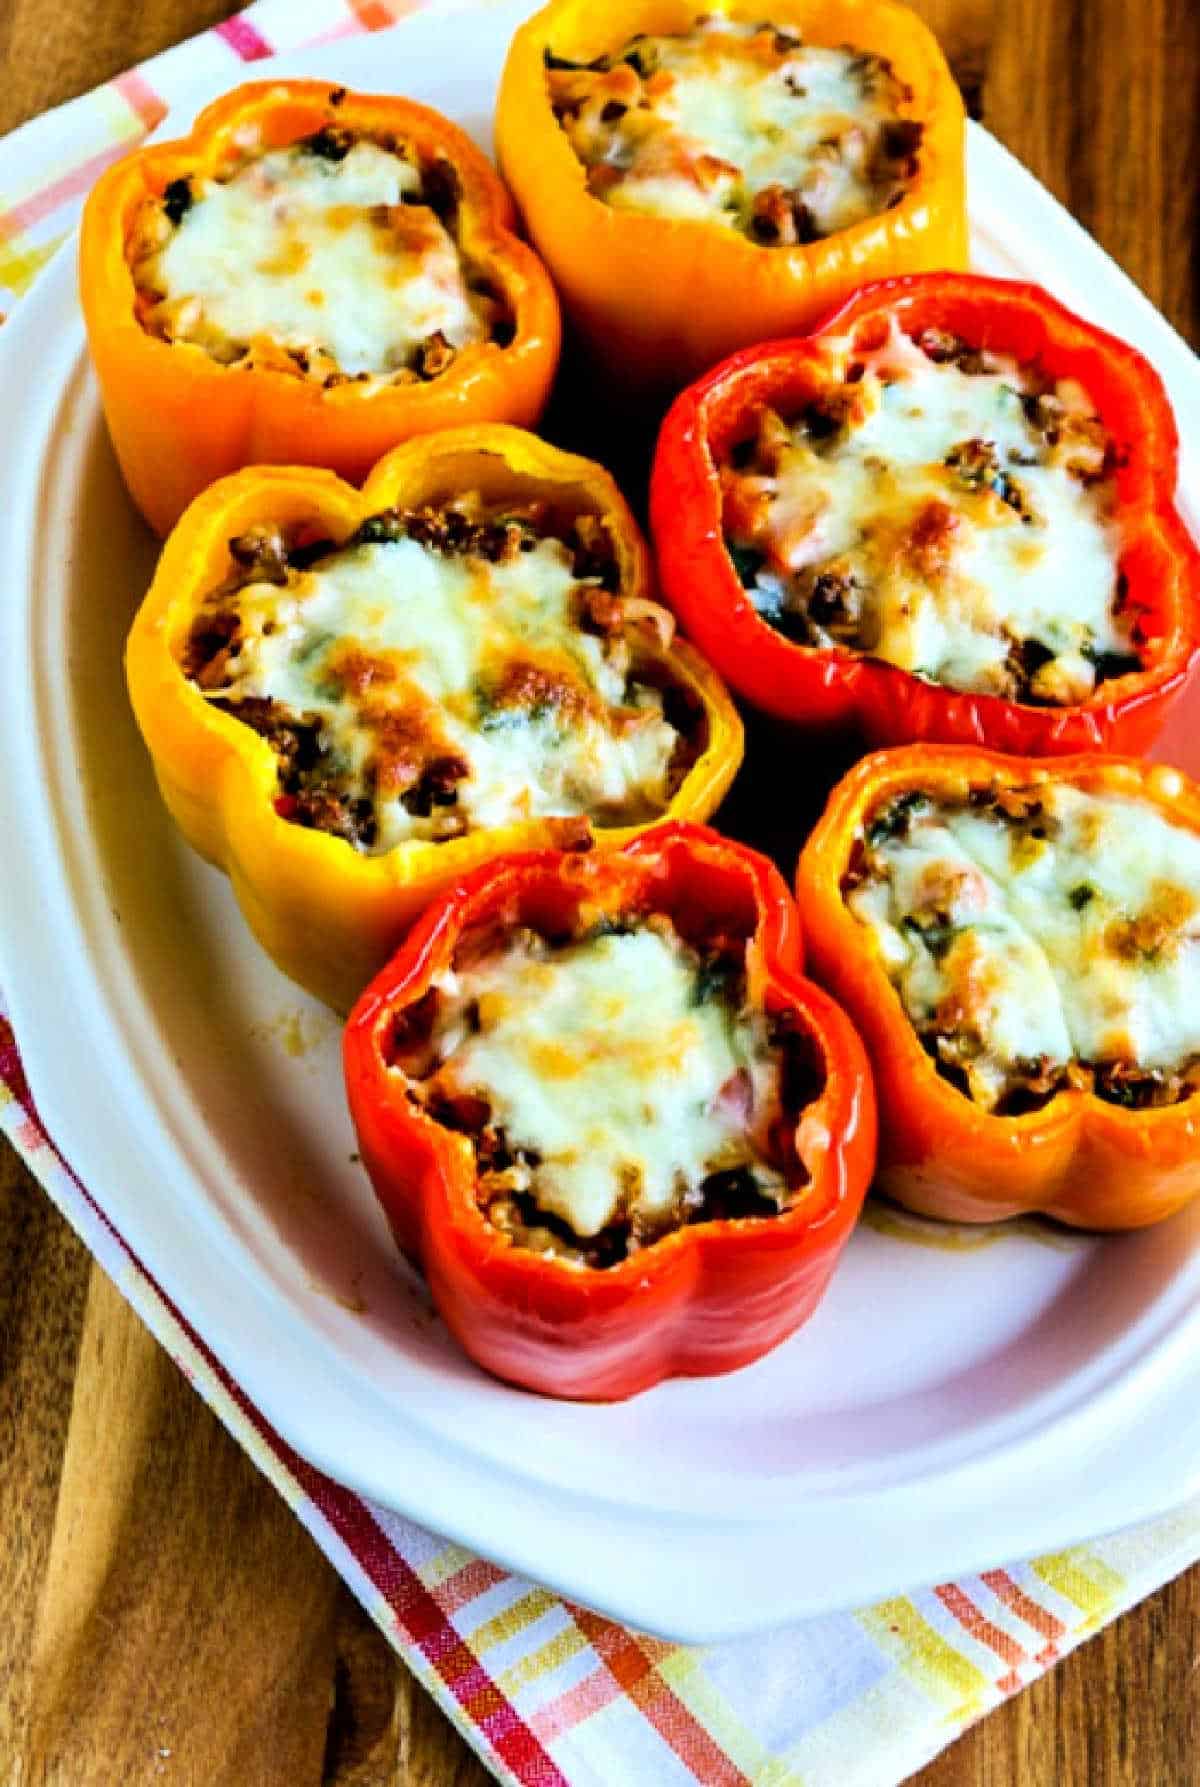 Cauliflower Rice Stuffed Peppers on serving plate with orange-yellow plaid napkin